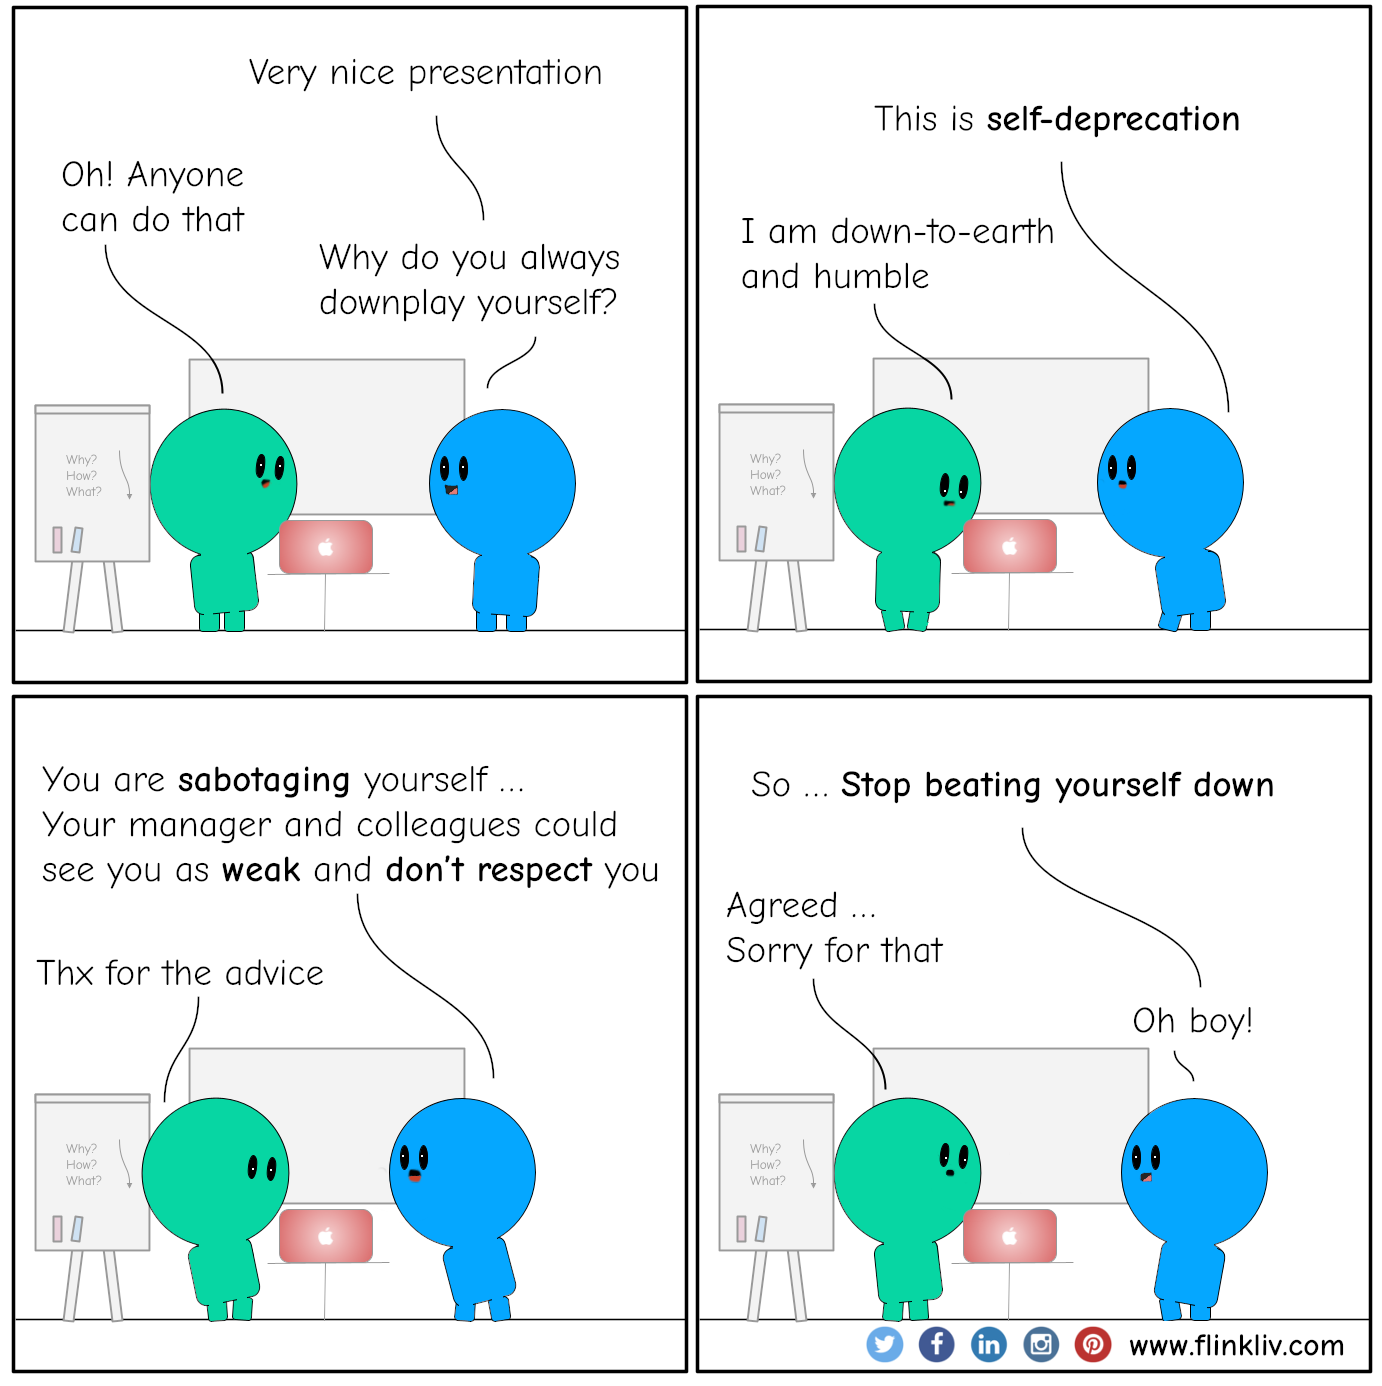 Conversation between A and B about Toxic Self-deprecation. 
              B: Nice presentation; Very creative
              A: Thx. Anyone can do that
              B: Why do you always downplay yourself?
              A: What?
              
              
              B: This is self-deprecation
              A: I am down-to-earth and humble
              
              B: You are sabotaging yourself; your managers and colleagues might see you as weak and don’t respect you
              A: Thx for the advice
              
              B: So, stop beating yourself down
              A: Agreed, Sorry for that
              B: Oh boy!
            
              